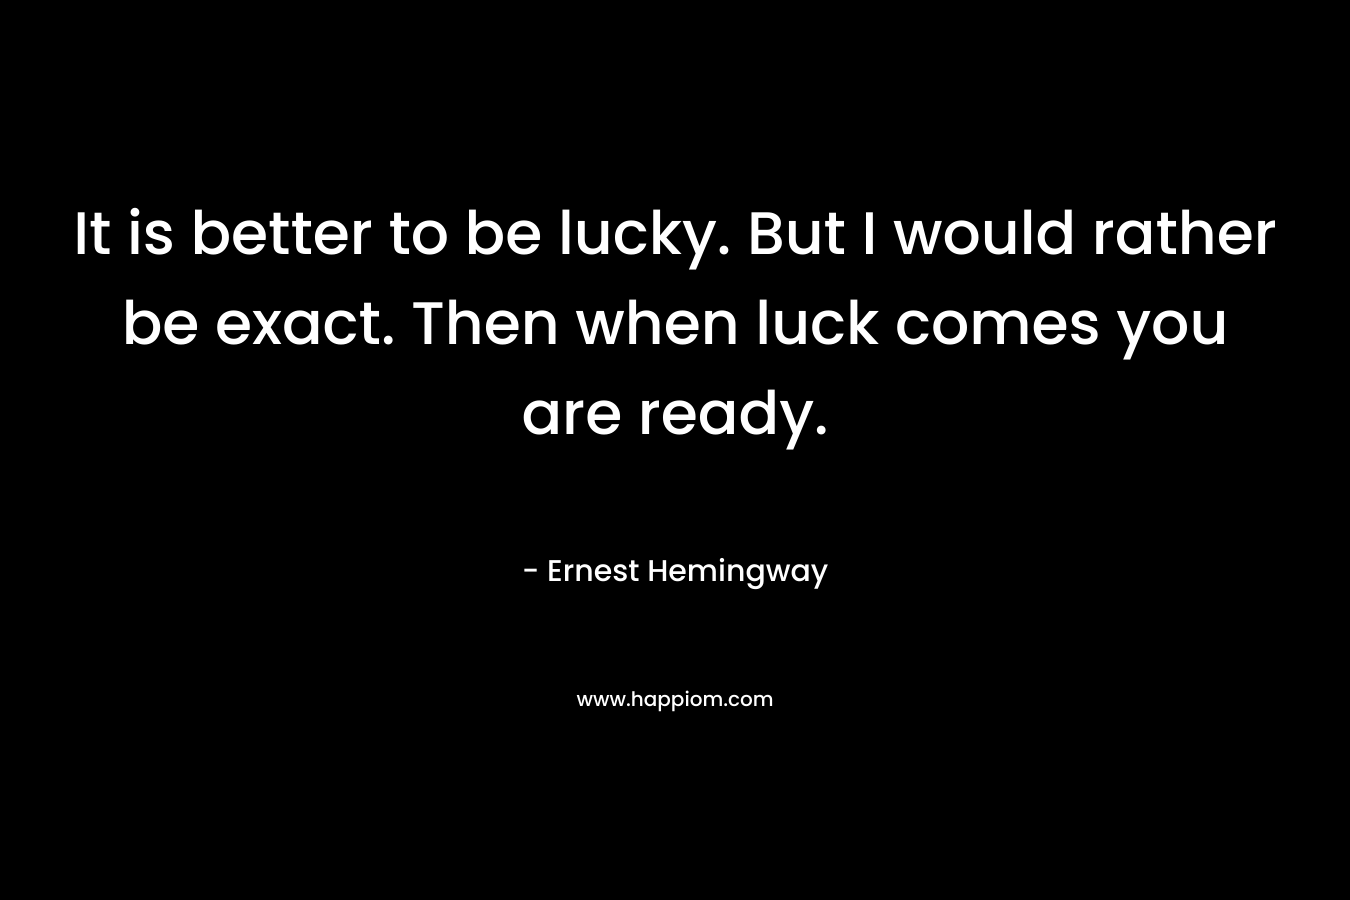 It is better to be lucky. But I would rather be exact. Then when luck comes you are ready. – Ernest Hemingway